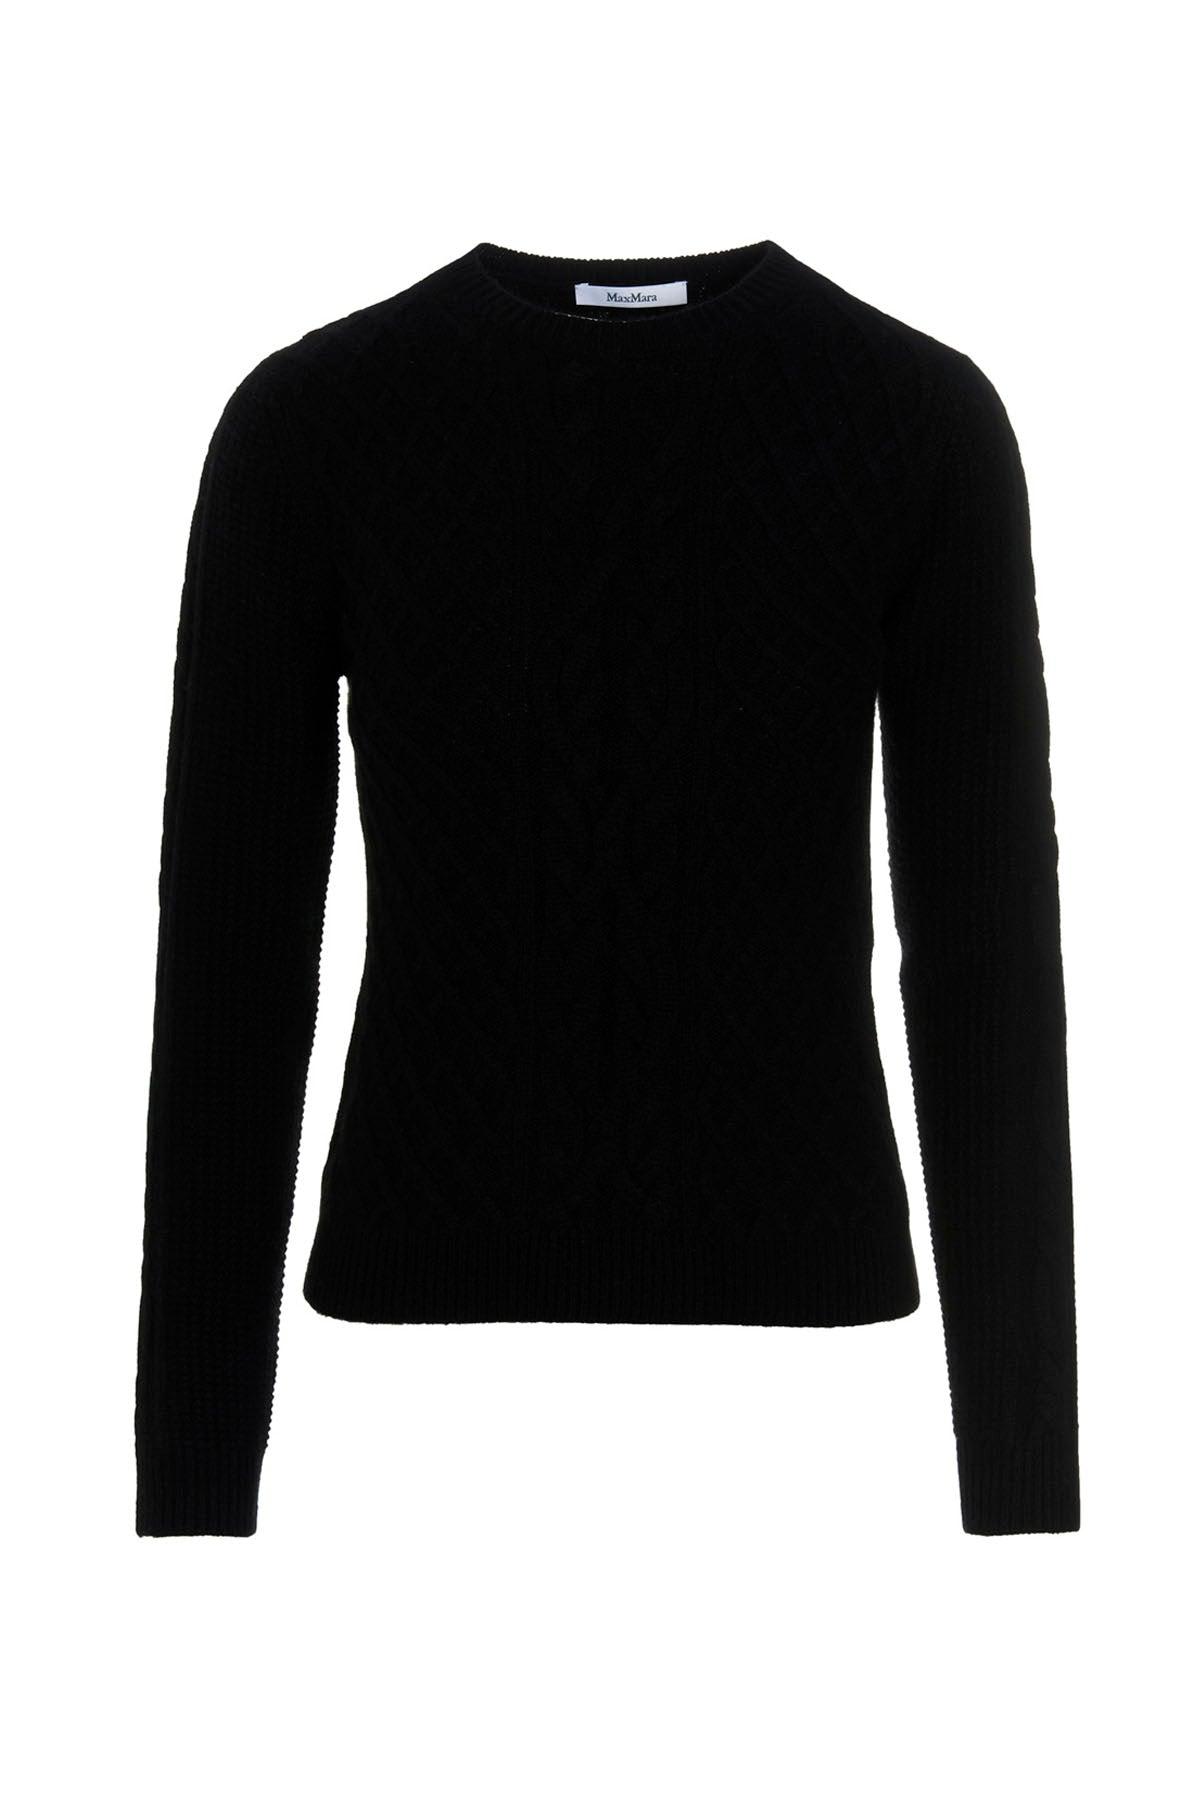 Max Mara Firma Cable Knit Sweater